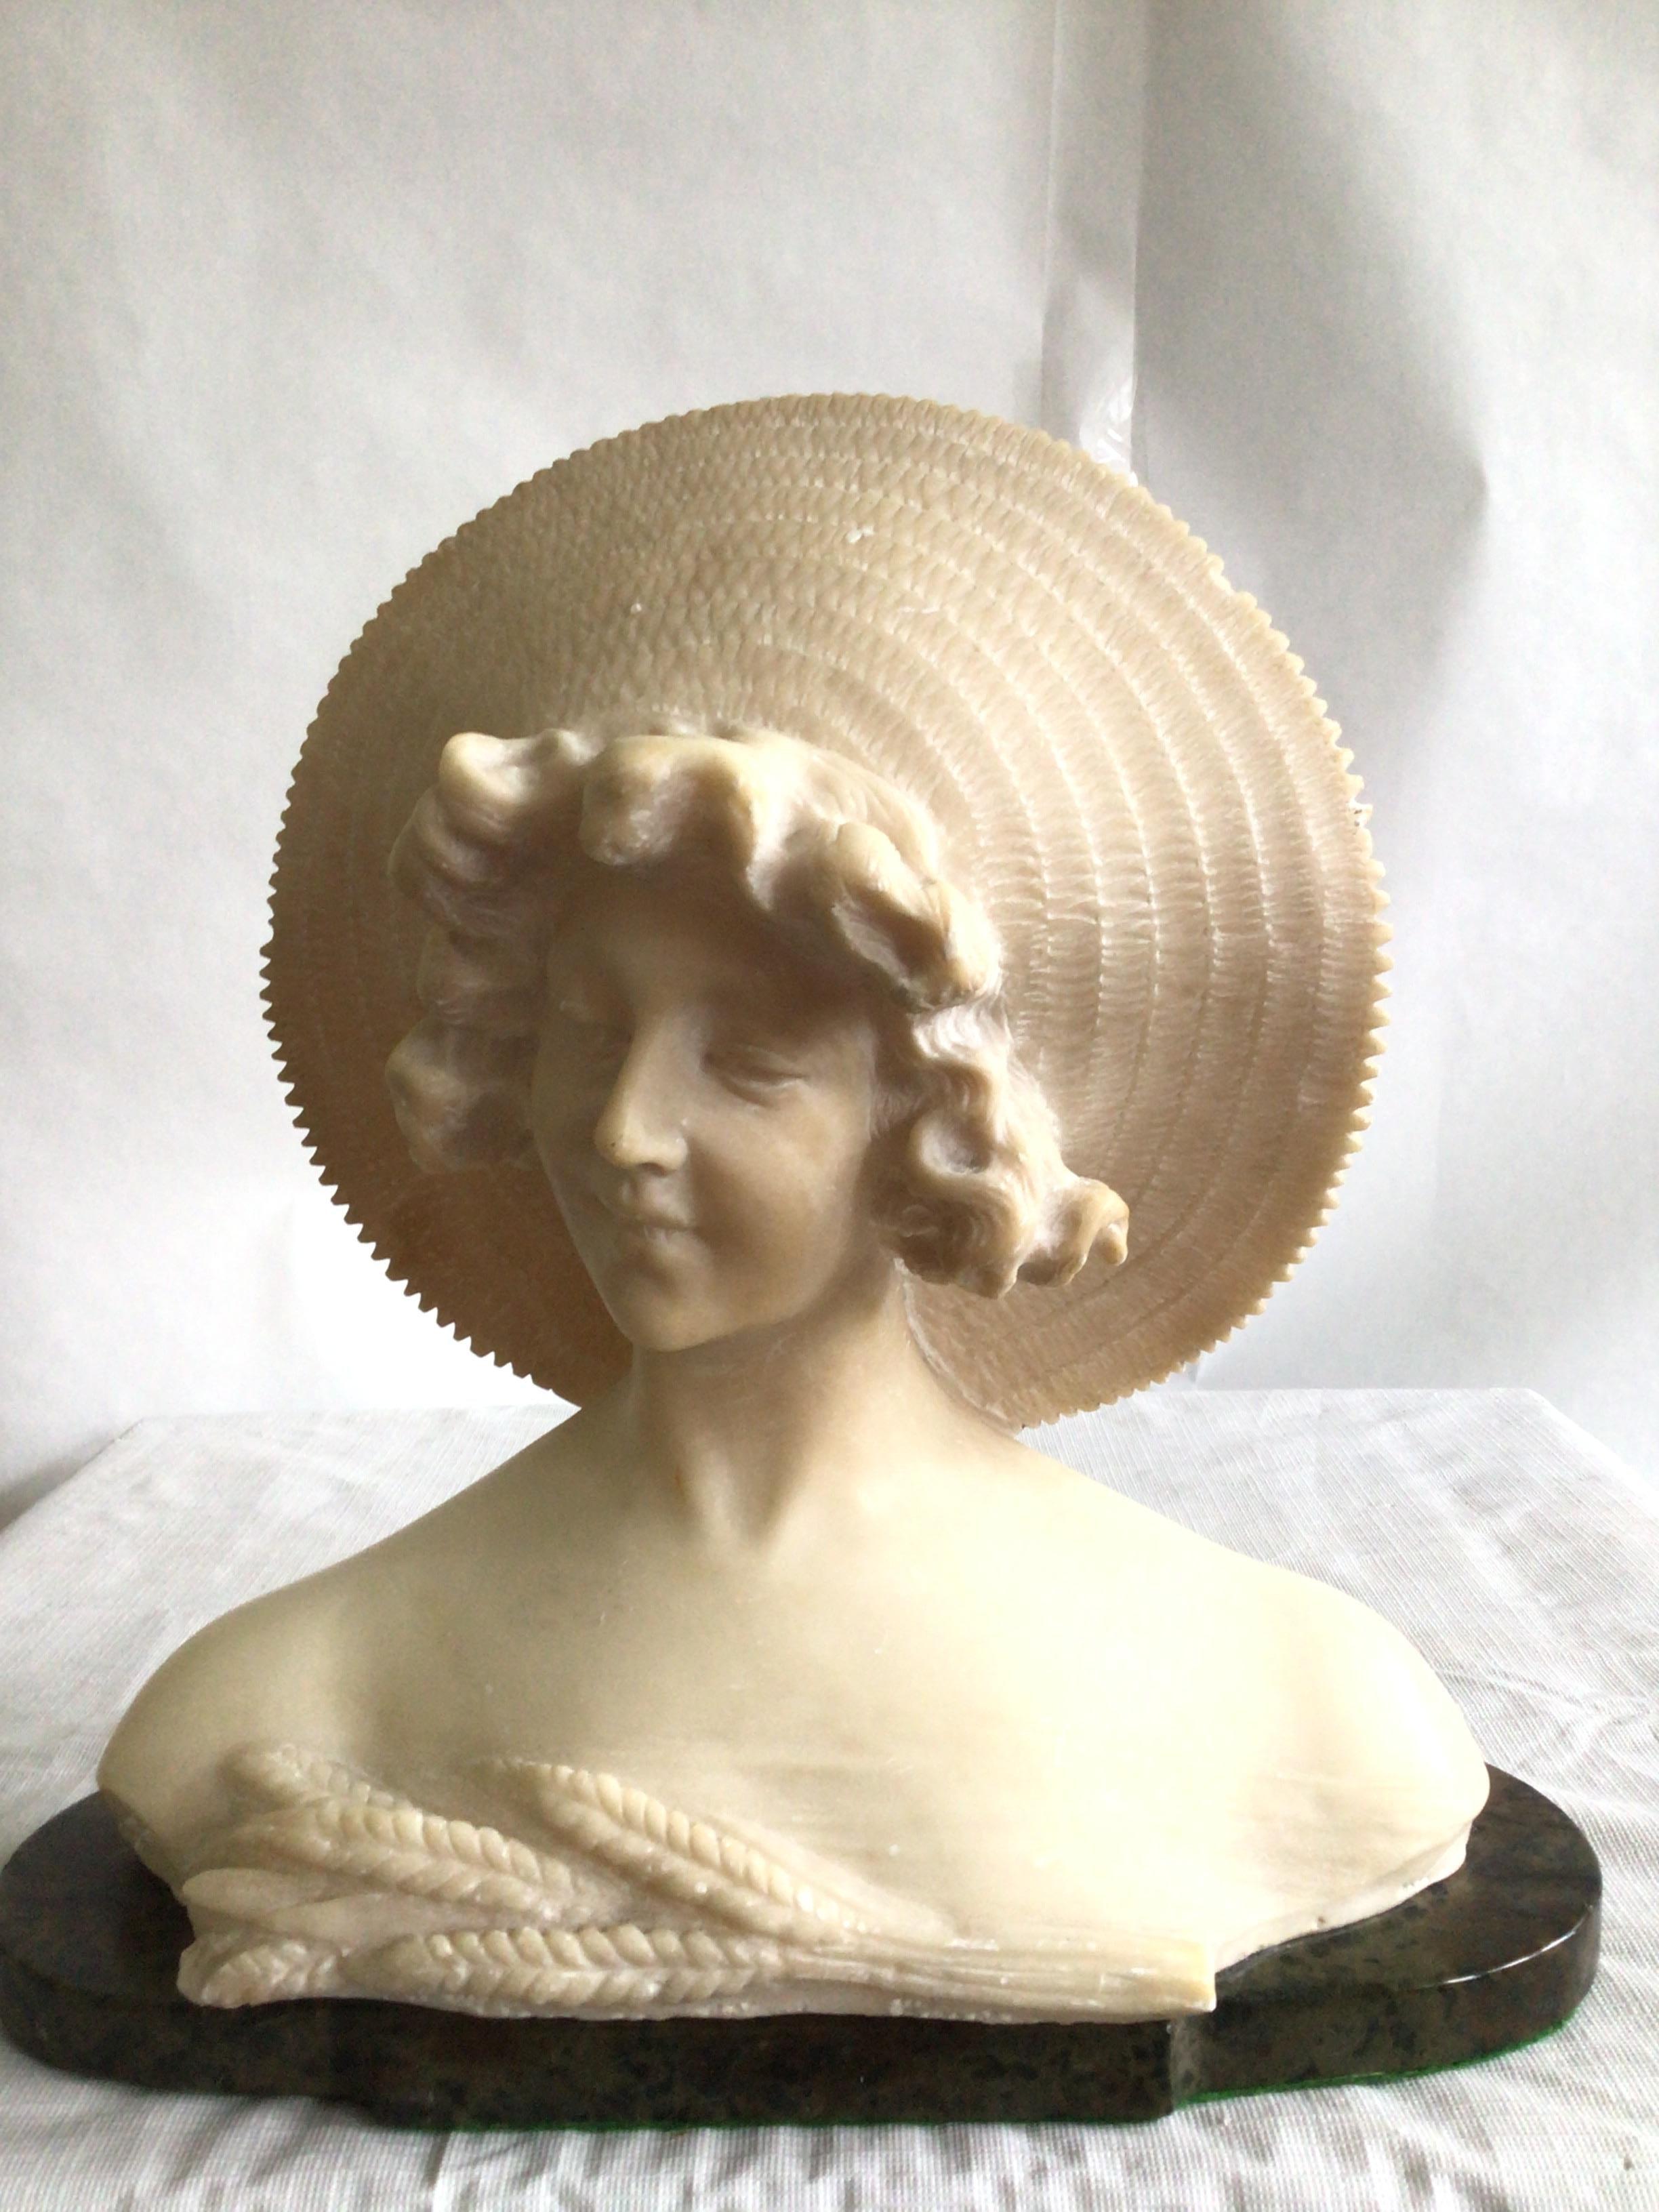 1940s Art Nouveau Style Bust Of A Young Woman On A Marble Base
The sheaf of wheat represents fertility
No signature found
Small knick on the top of hat (as shown)